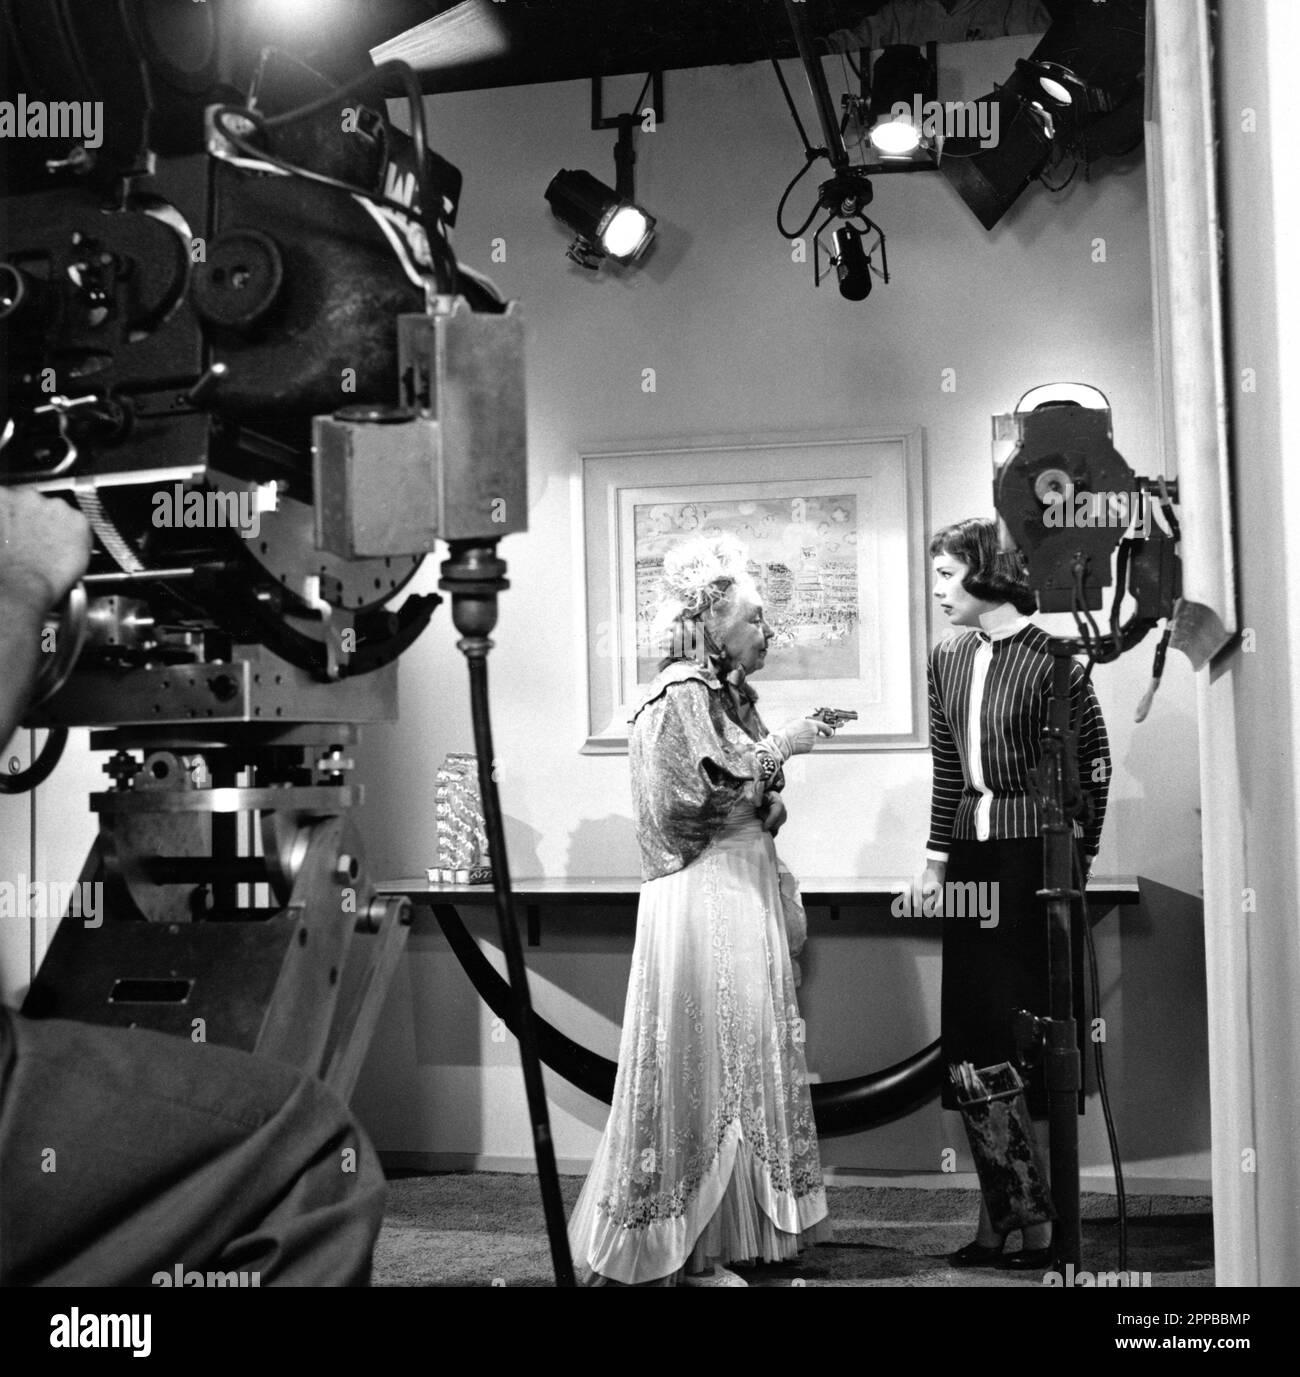 MARY YOUNG and PHYLLIS KIRK as Nora Charles on set candid during filming of Season 1 Episode 7 ACROSTIC MURDERS director OSCAR RUDOLPH characters created by Dashiell Hammett story and teleplay Phil Davis and Charles Hoffman aired on November 1st 1957 from THE THIN MAN TV Series 1957 - 1959 Clarington Productions / MGM Television / National Broadcasting Company (NBC) Stock Photo